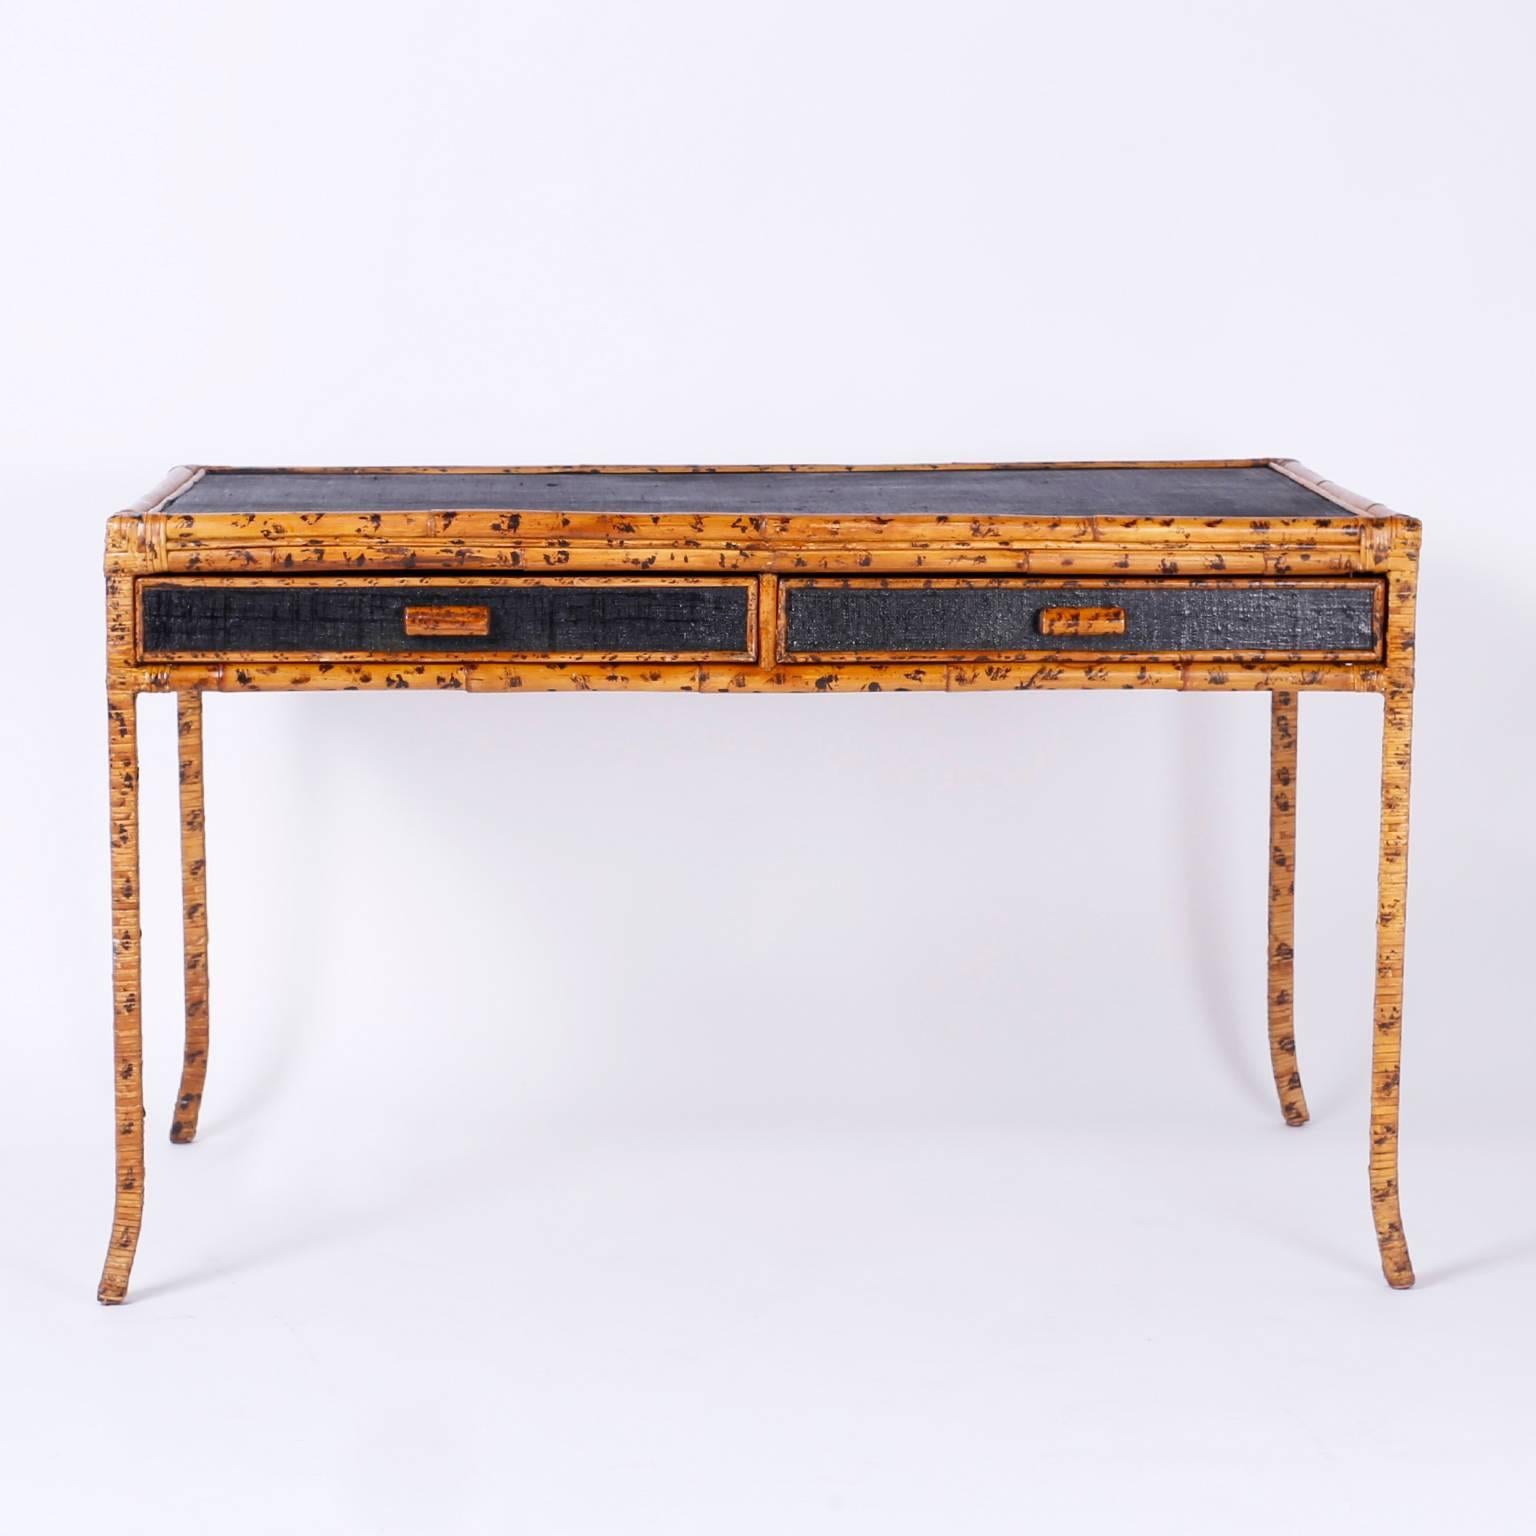 Chic midcentury interpretation of British colonial style desk or writing table with a faux bamboo frame and black painted grasscloth panels on the case. The elegant splayed legs are metal wrapped with decorated wicker. With an alluring organic